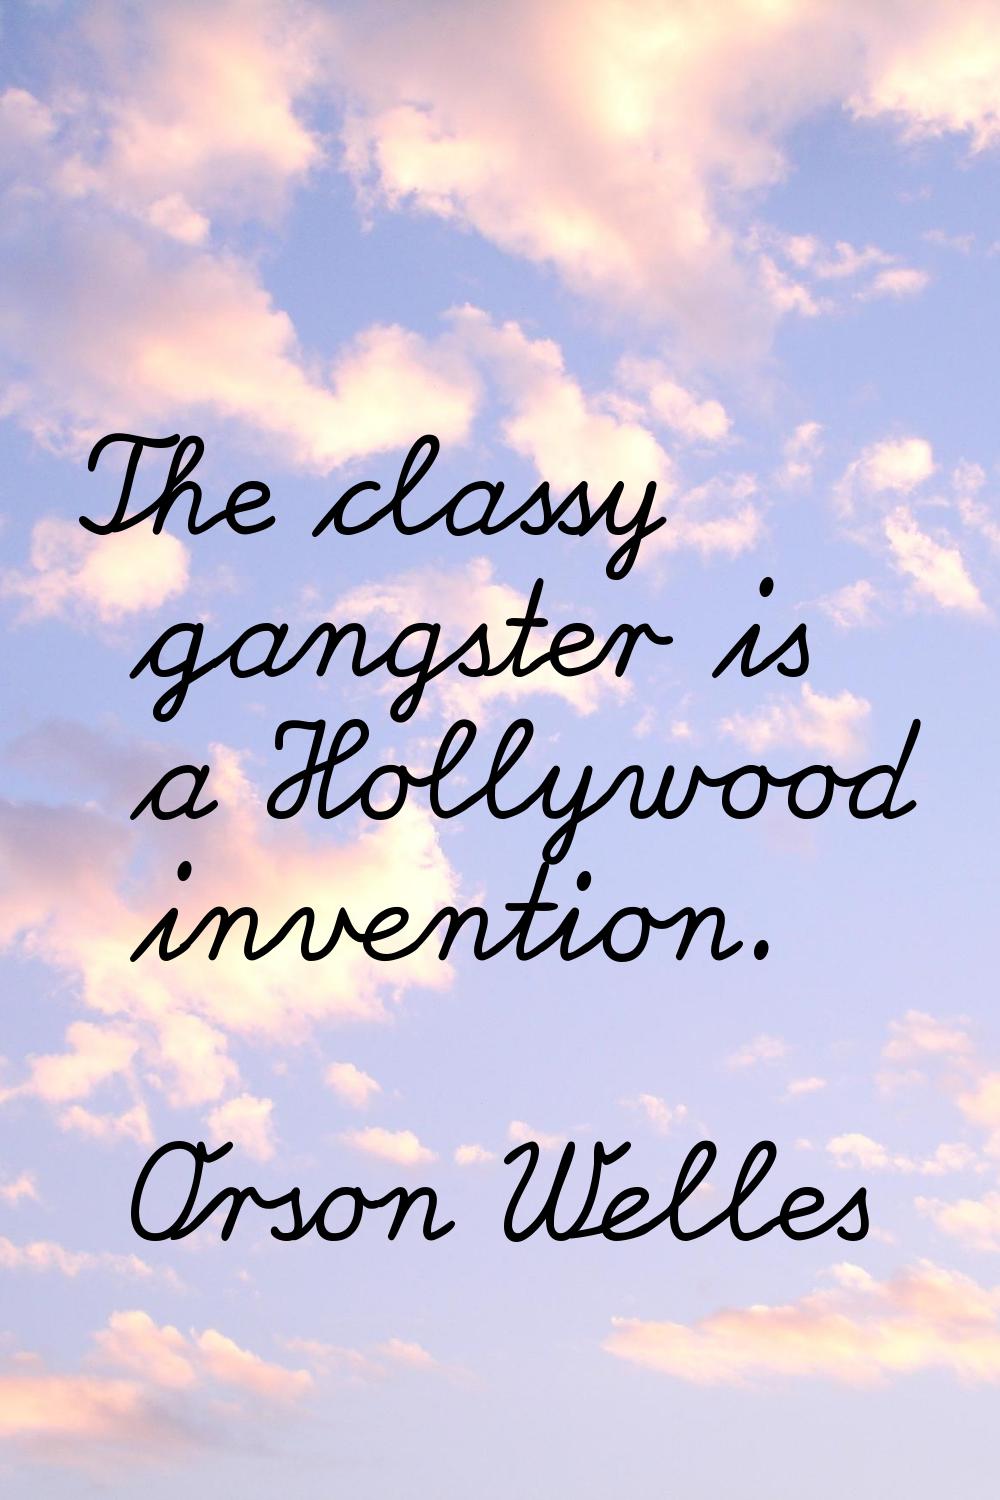 The classy gangster is a Hollywood invention.